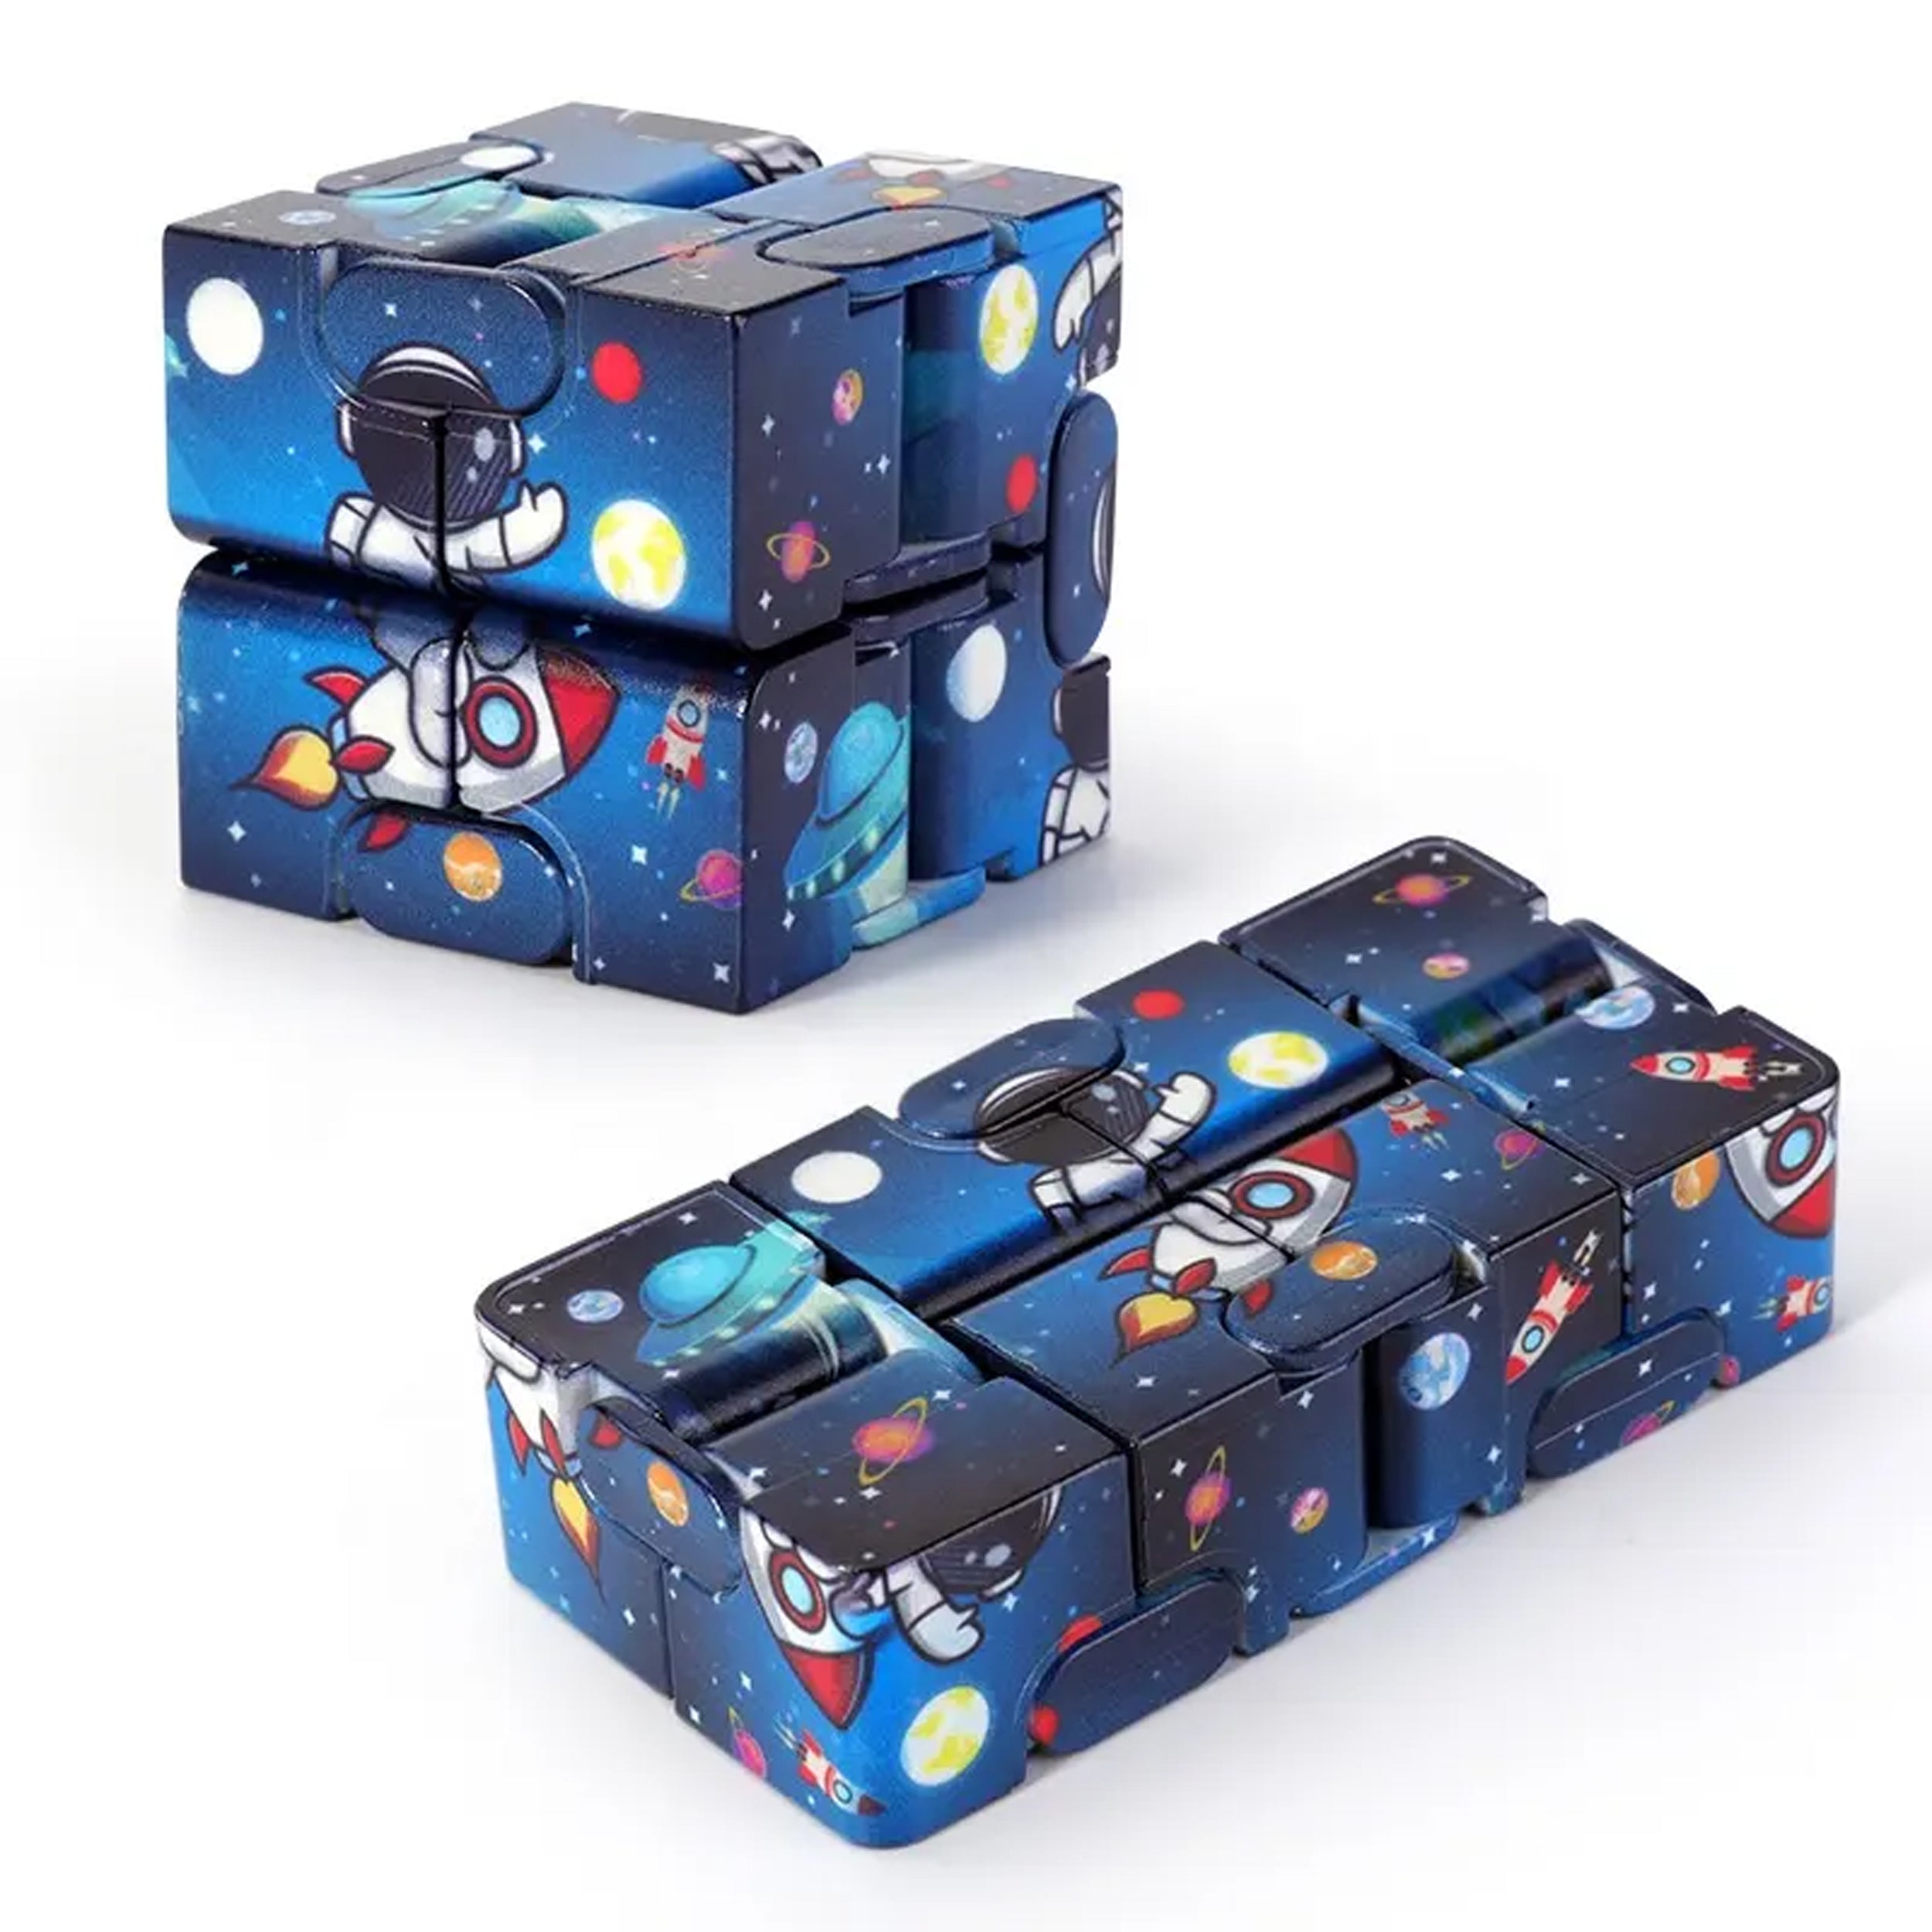 Explore the Universe with Astronaut Printing Flip Infinity Cube